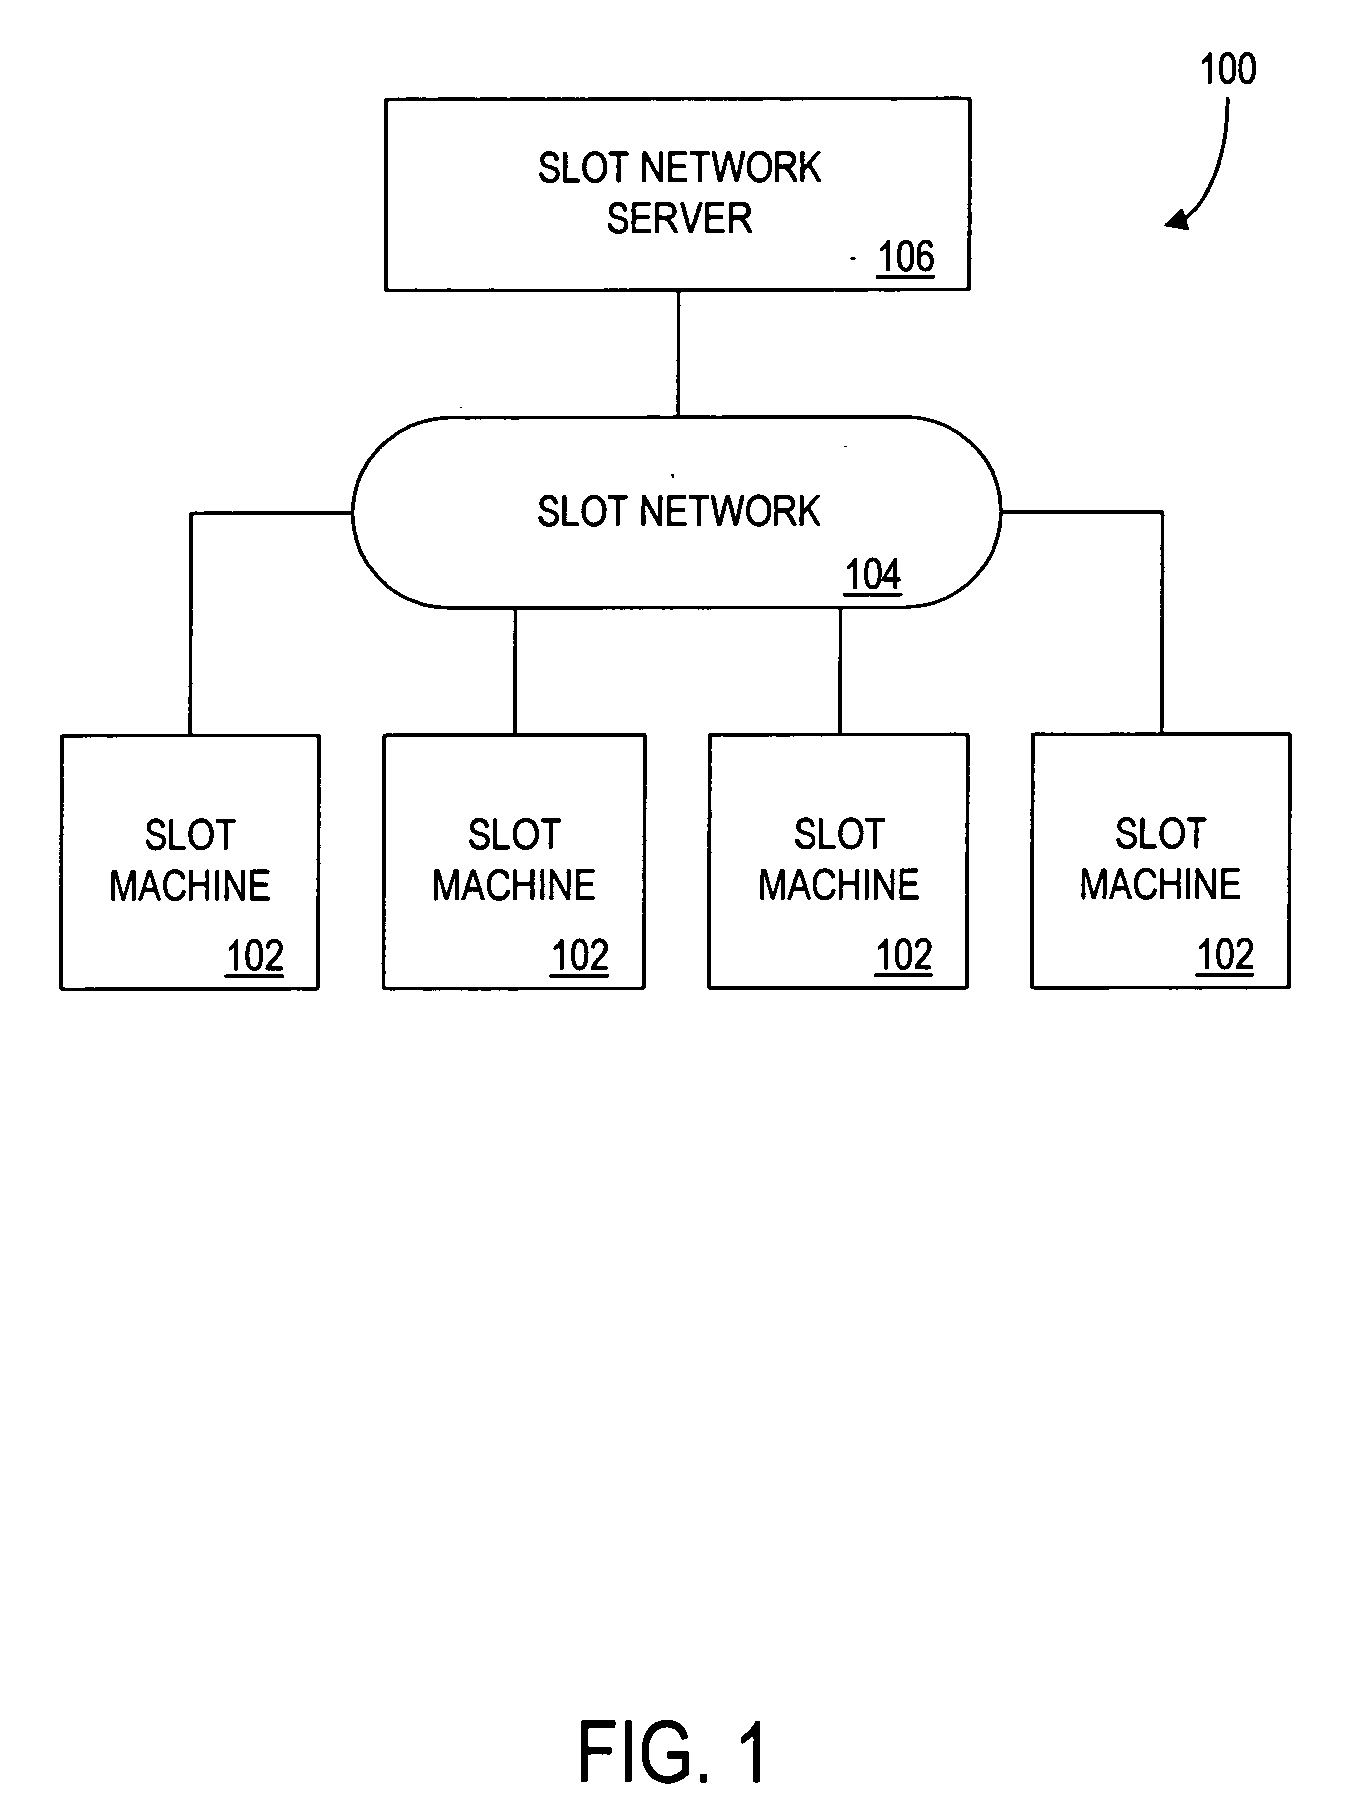 Gaming device for a flat rate play session and a method of operating same